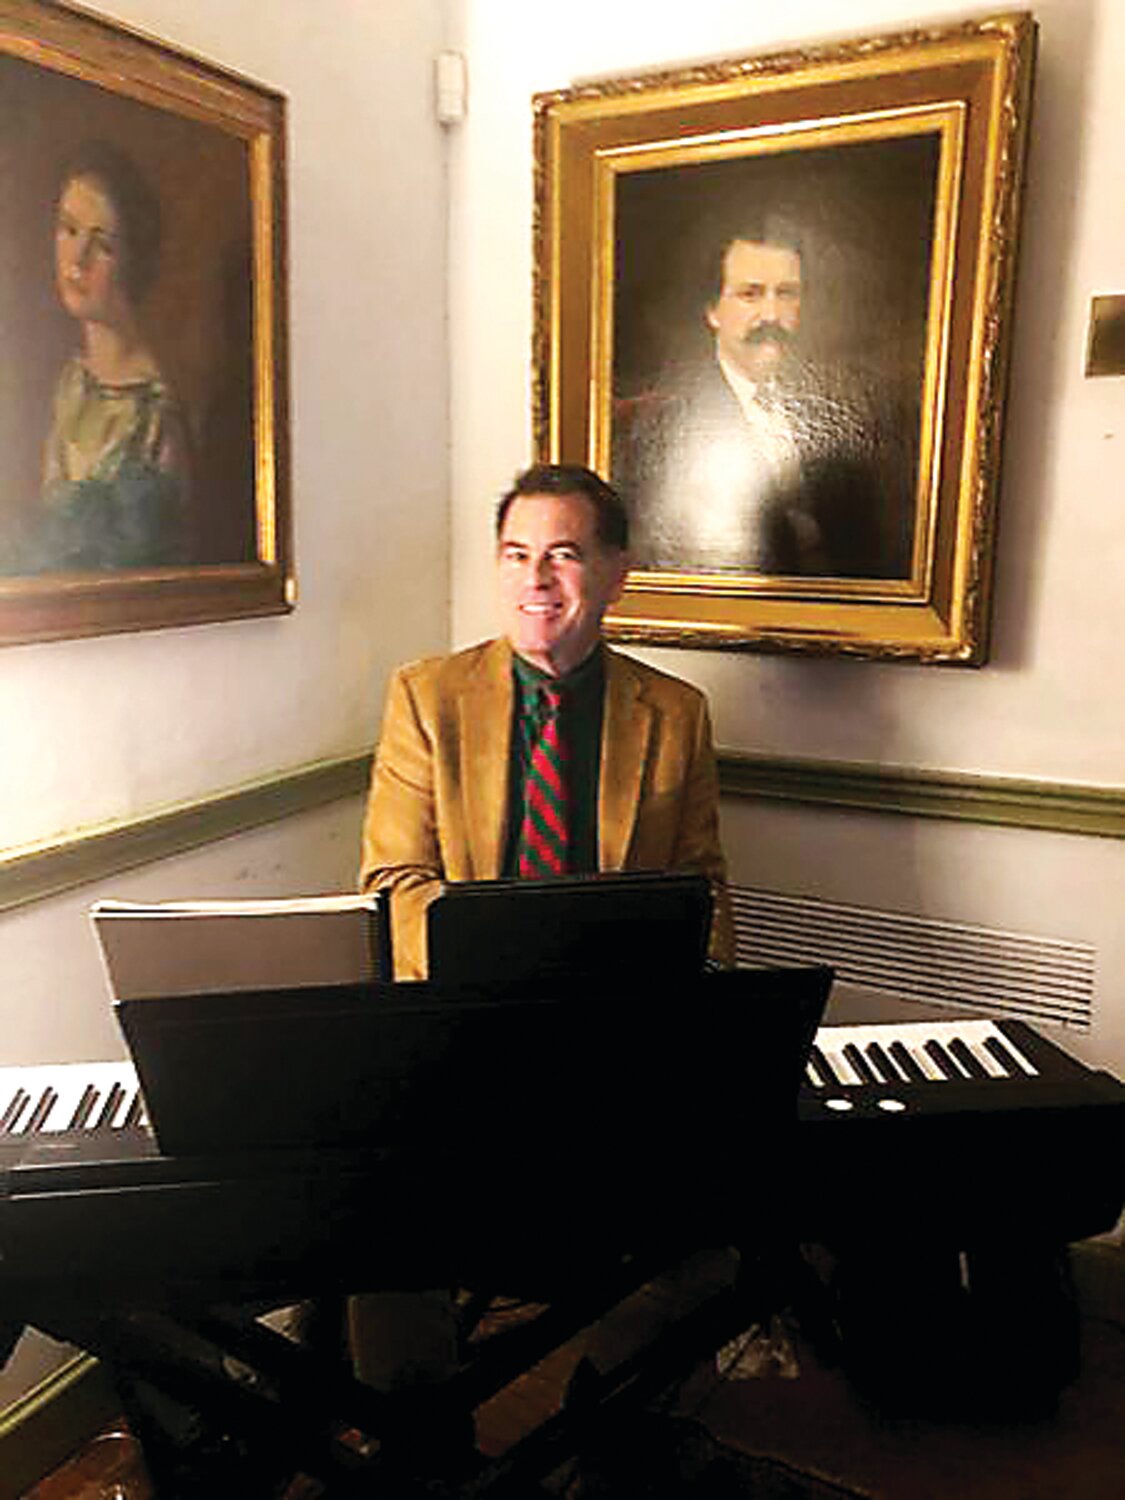 Adding to the holiday cheer at the Parry Mansion Museum on Dec. 3, Bob Egan entertained the crowd with traditional holiday carols and songs.